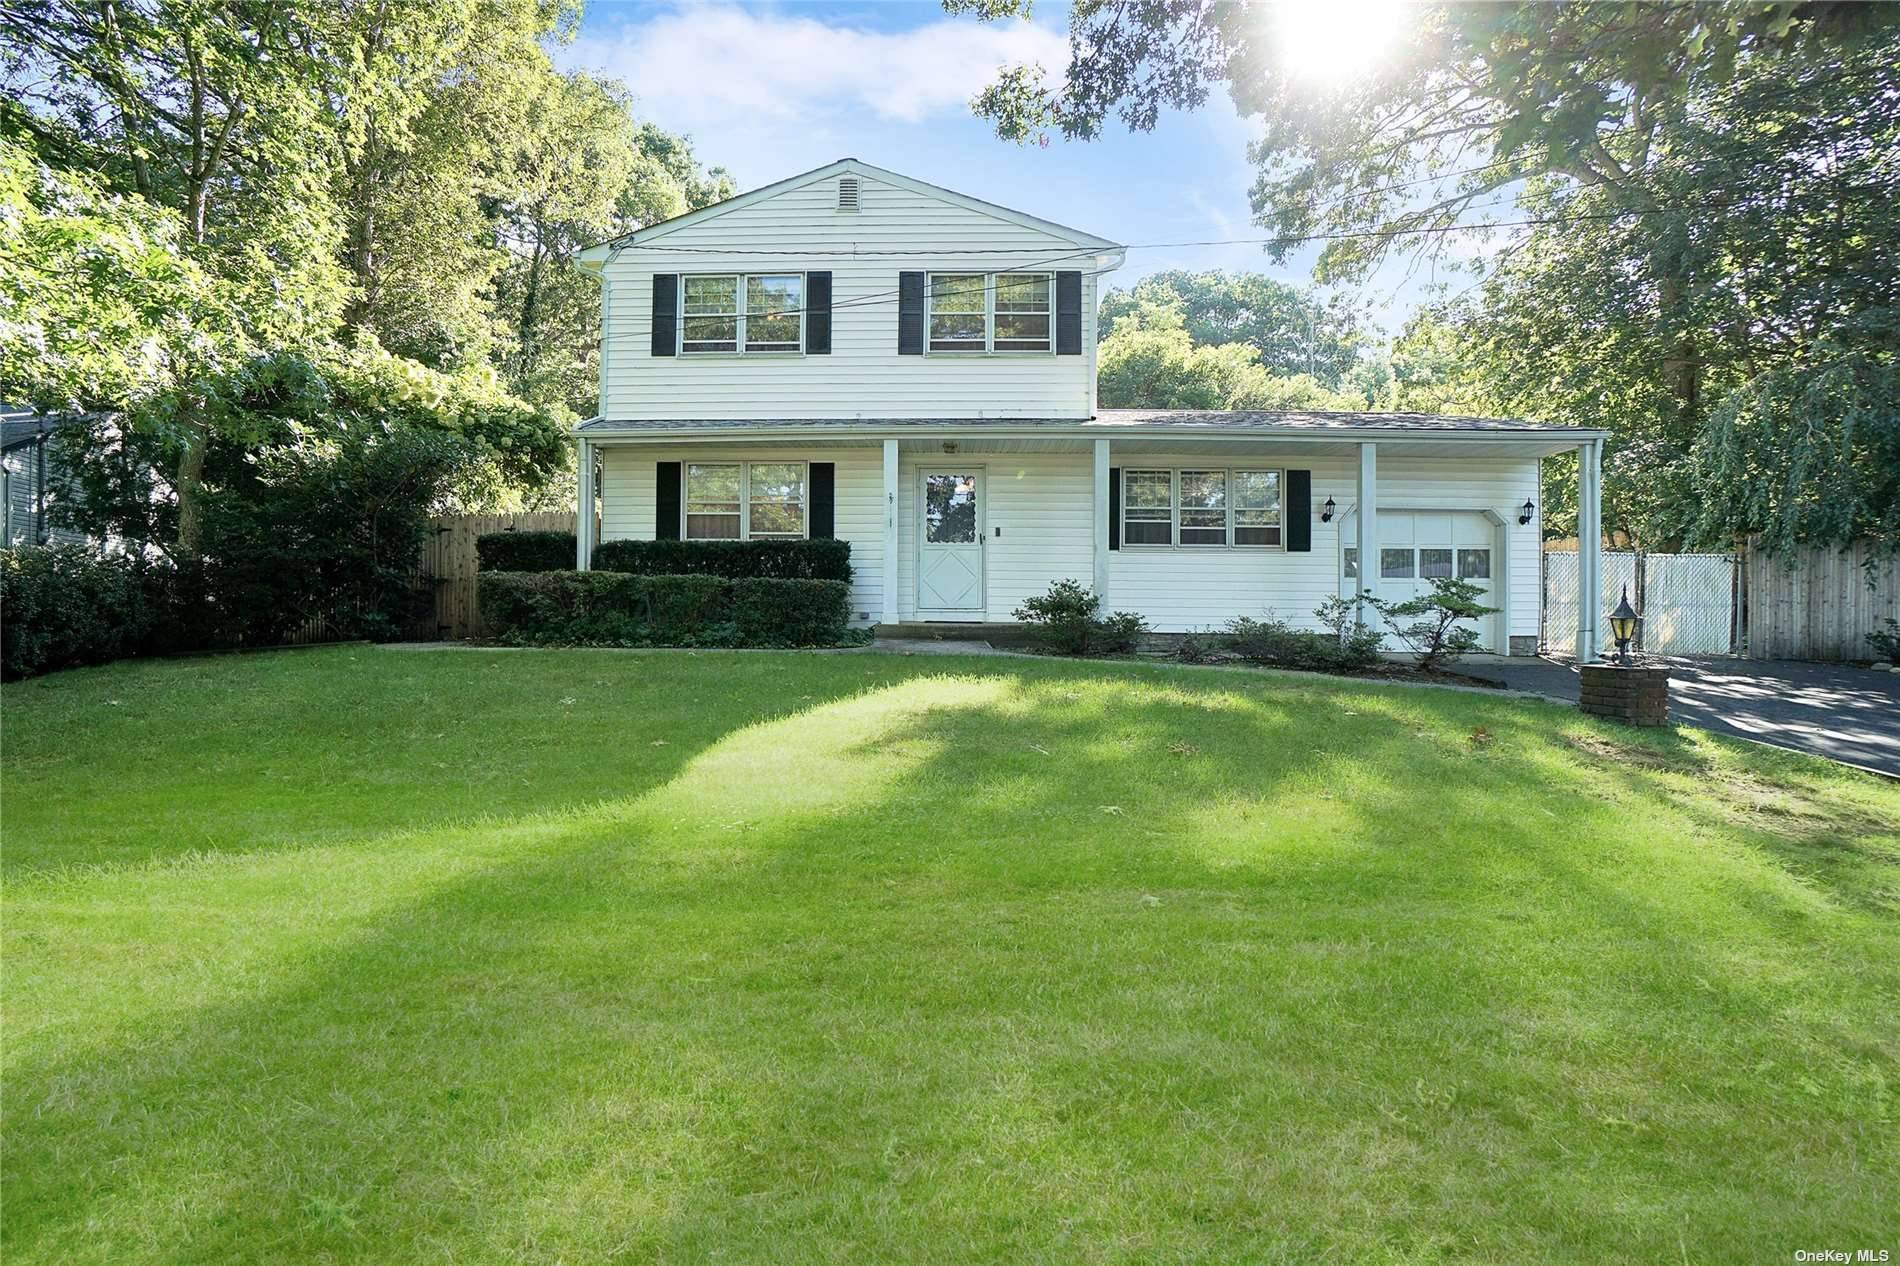 Great opportunity for Nice Size Colonial with Large Private Yard Wood Floors